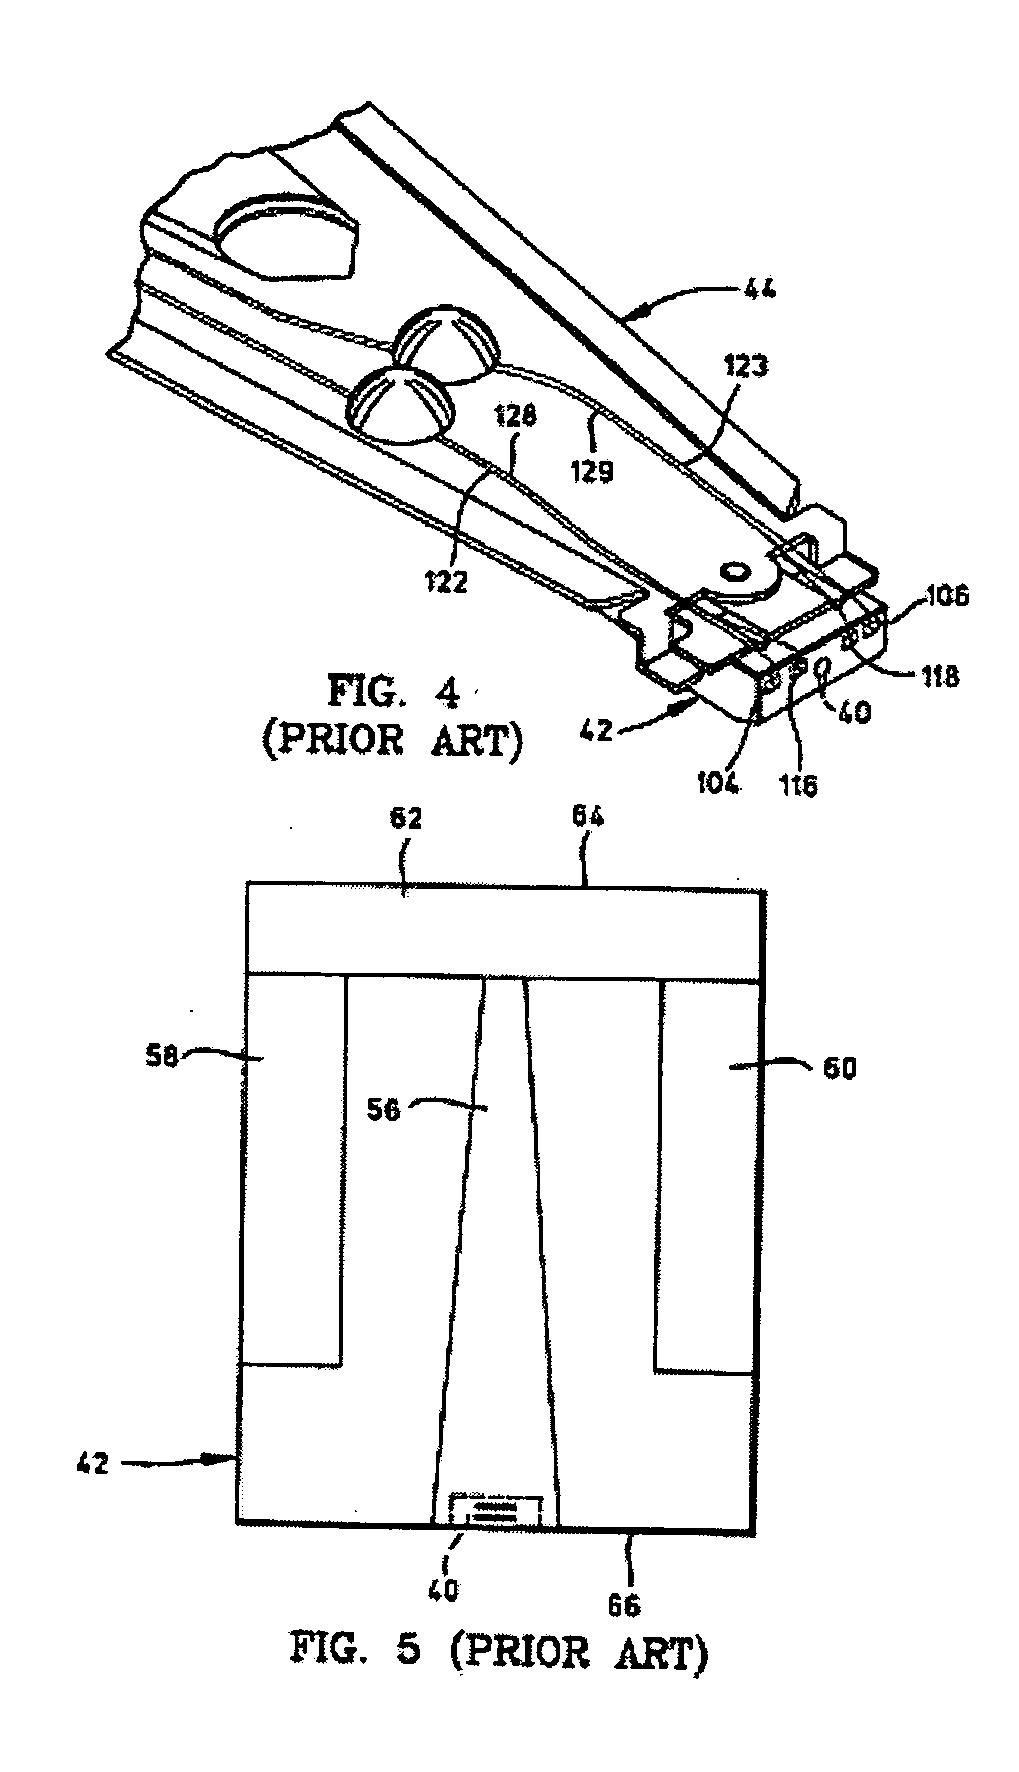 Perpendicular recording magnetic head with a write shield magnetically coupled to a first pole piece